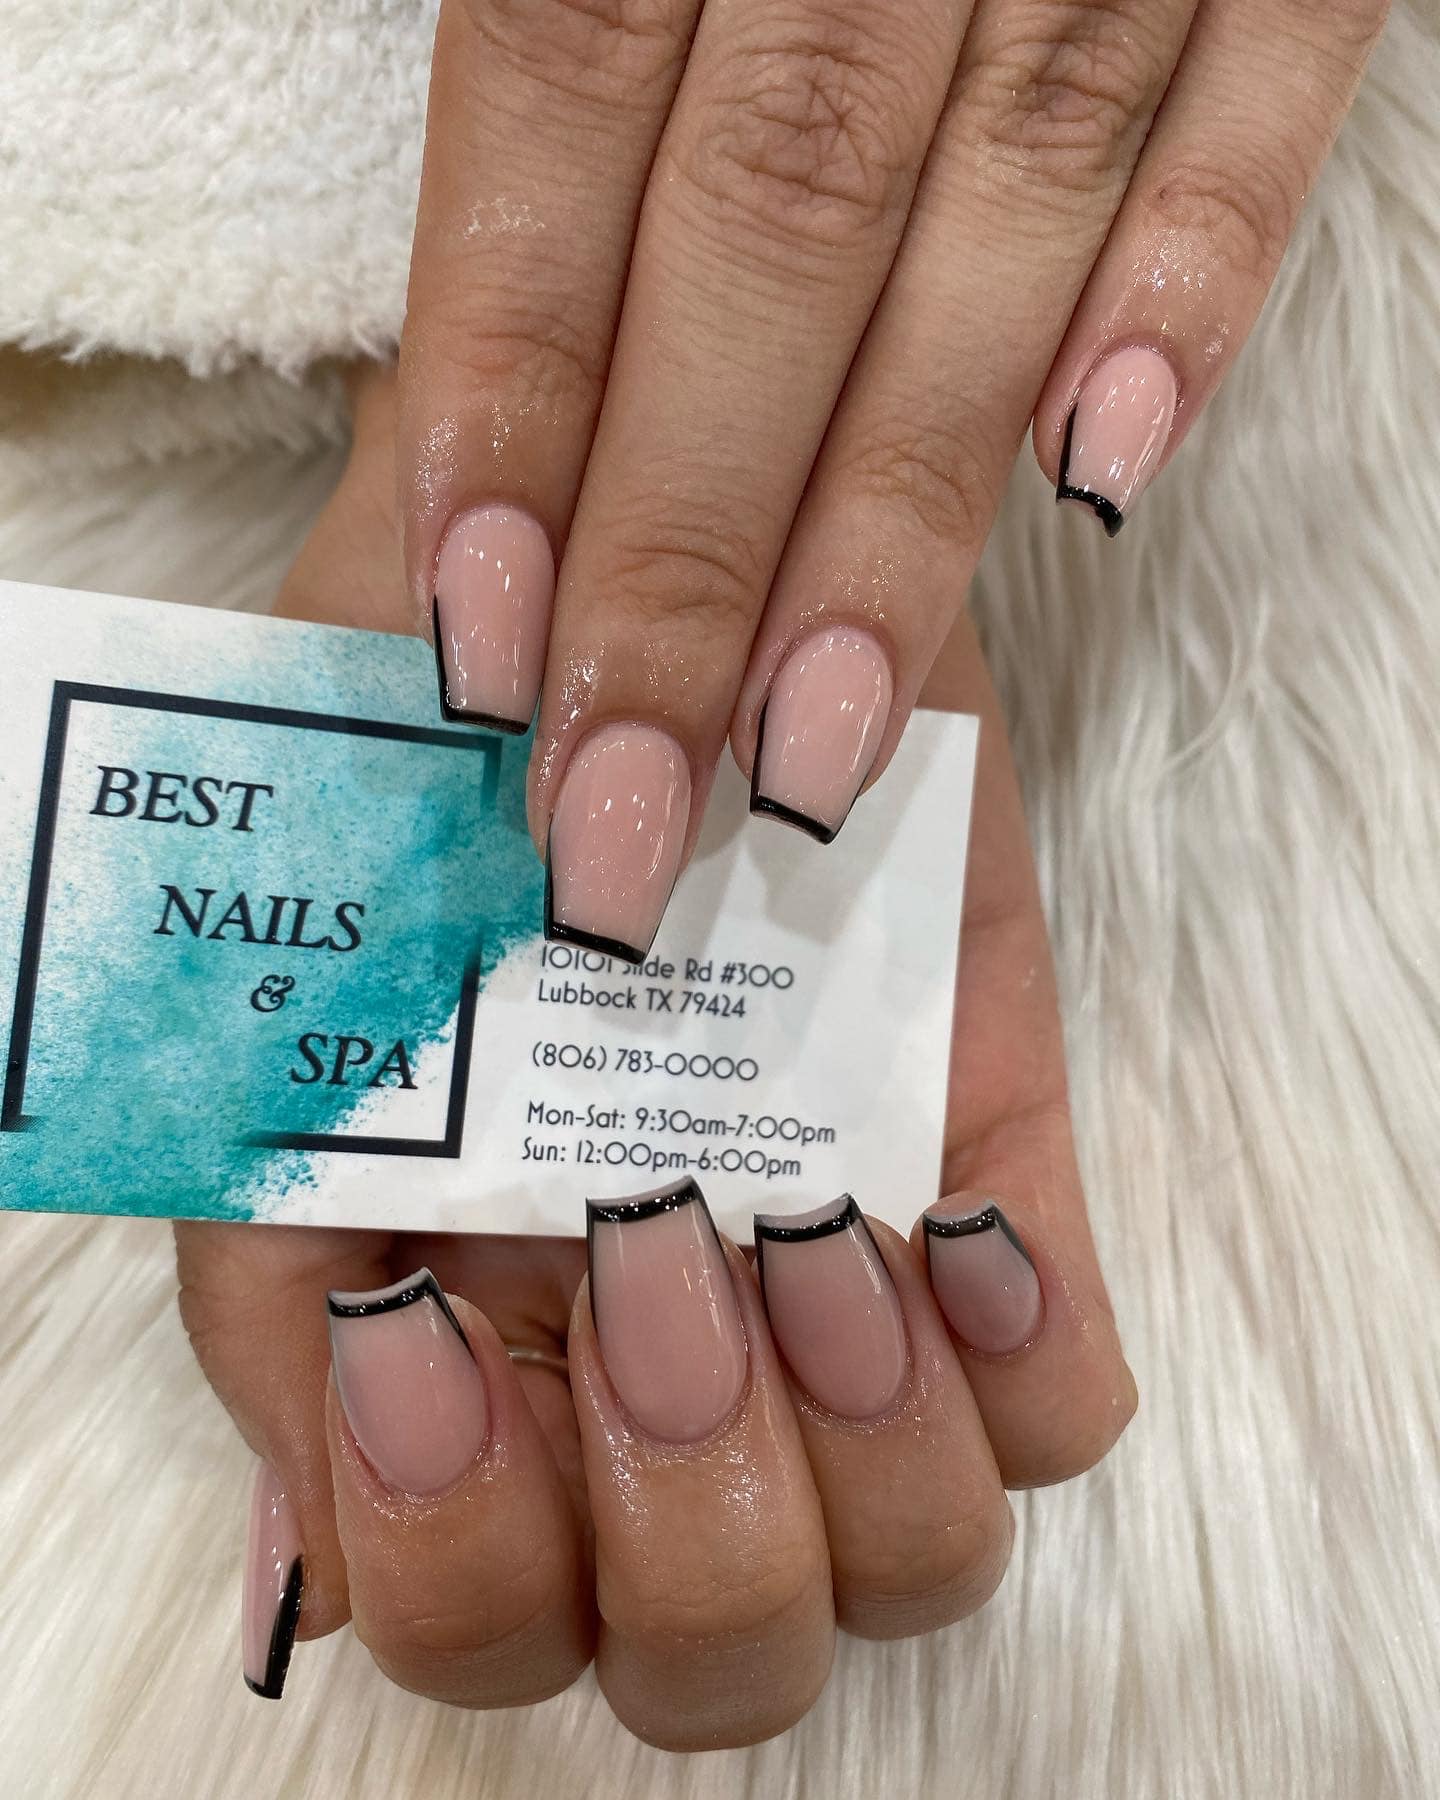 Best Nails & Spa 302 Lubbock Rd # 400, Brownfield Texas 79316